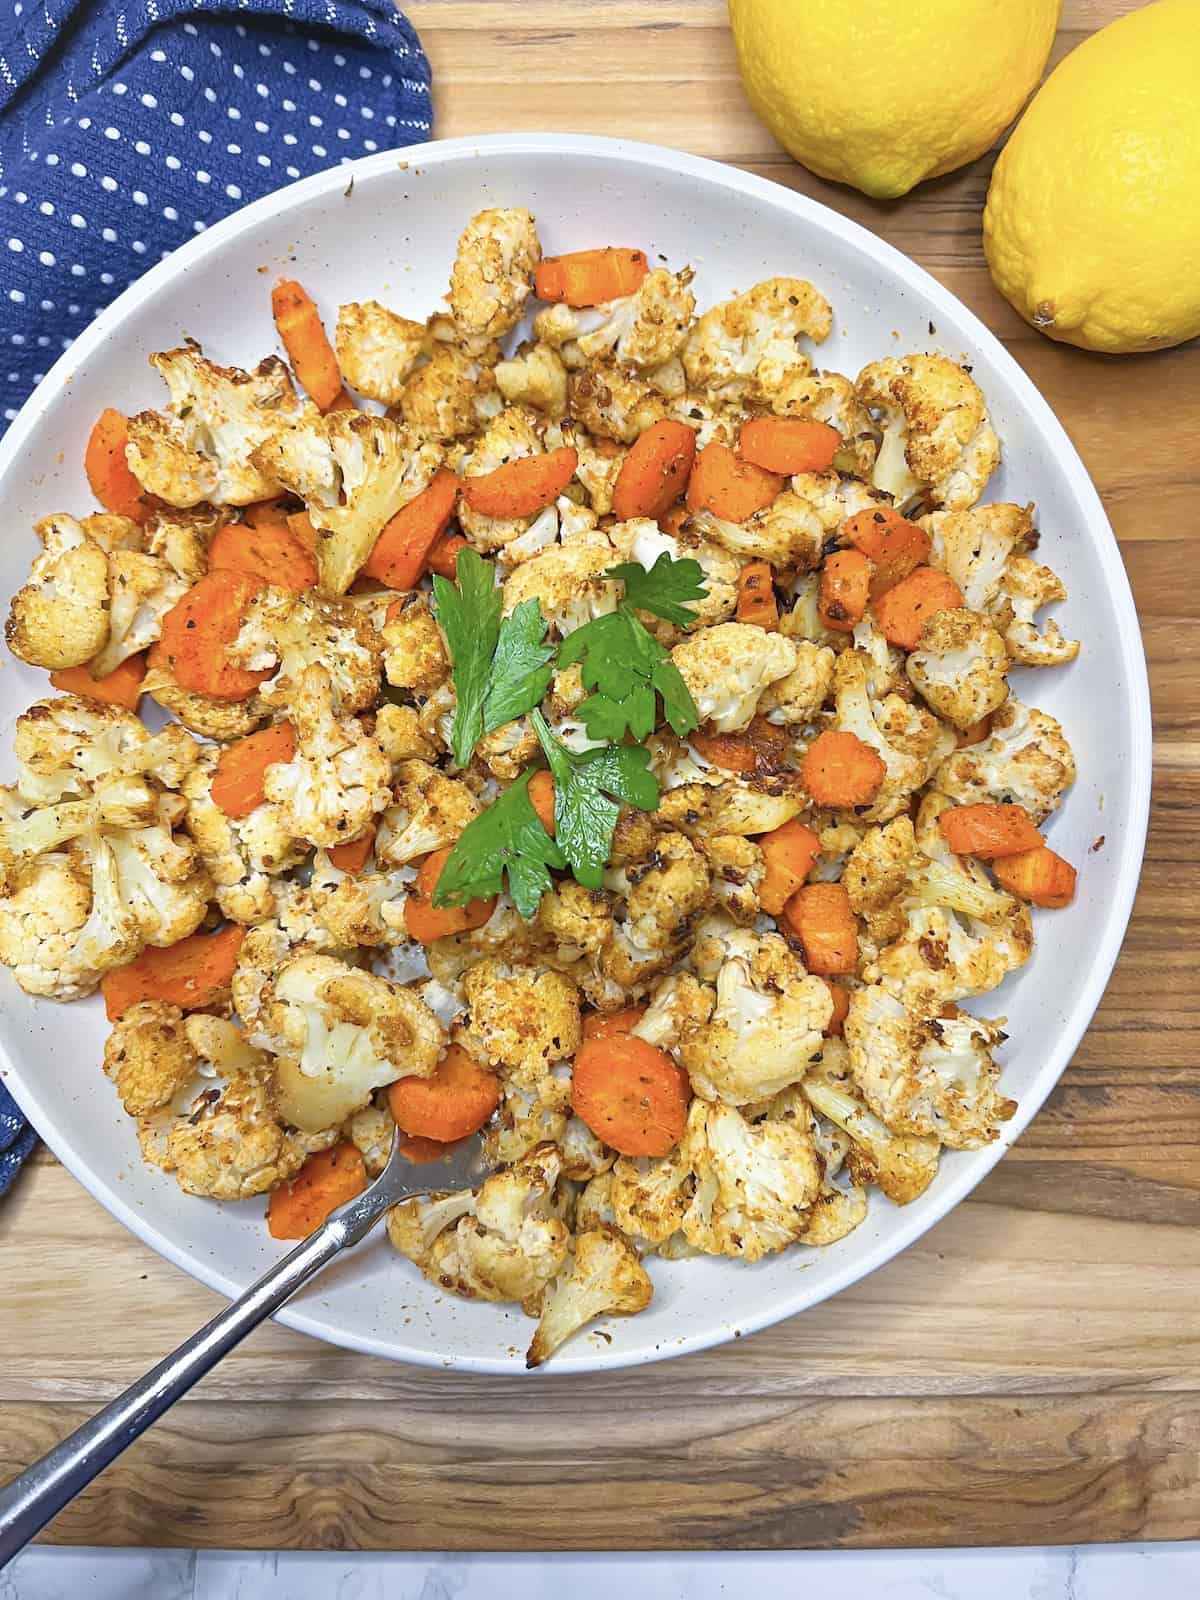 Cauliflower and carrots with lemons in the background